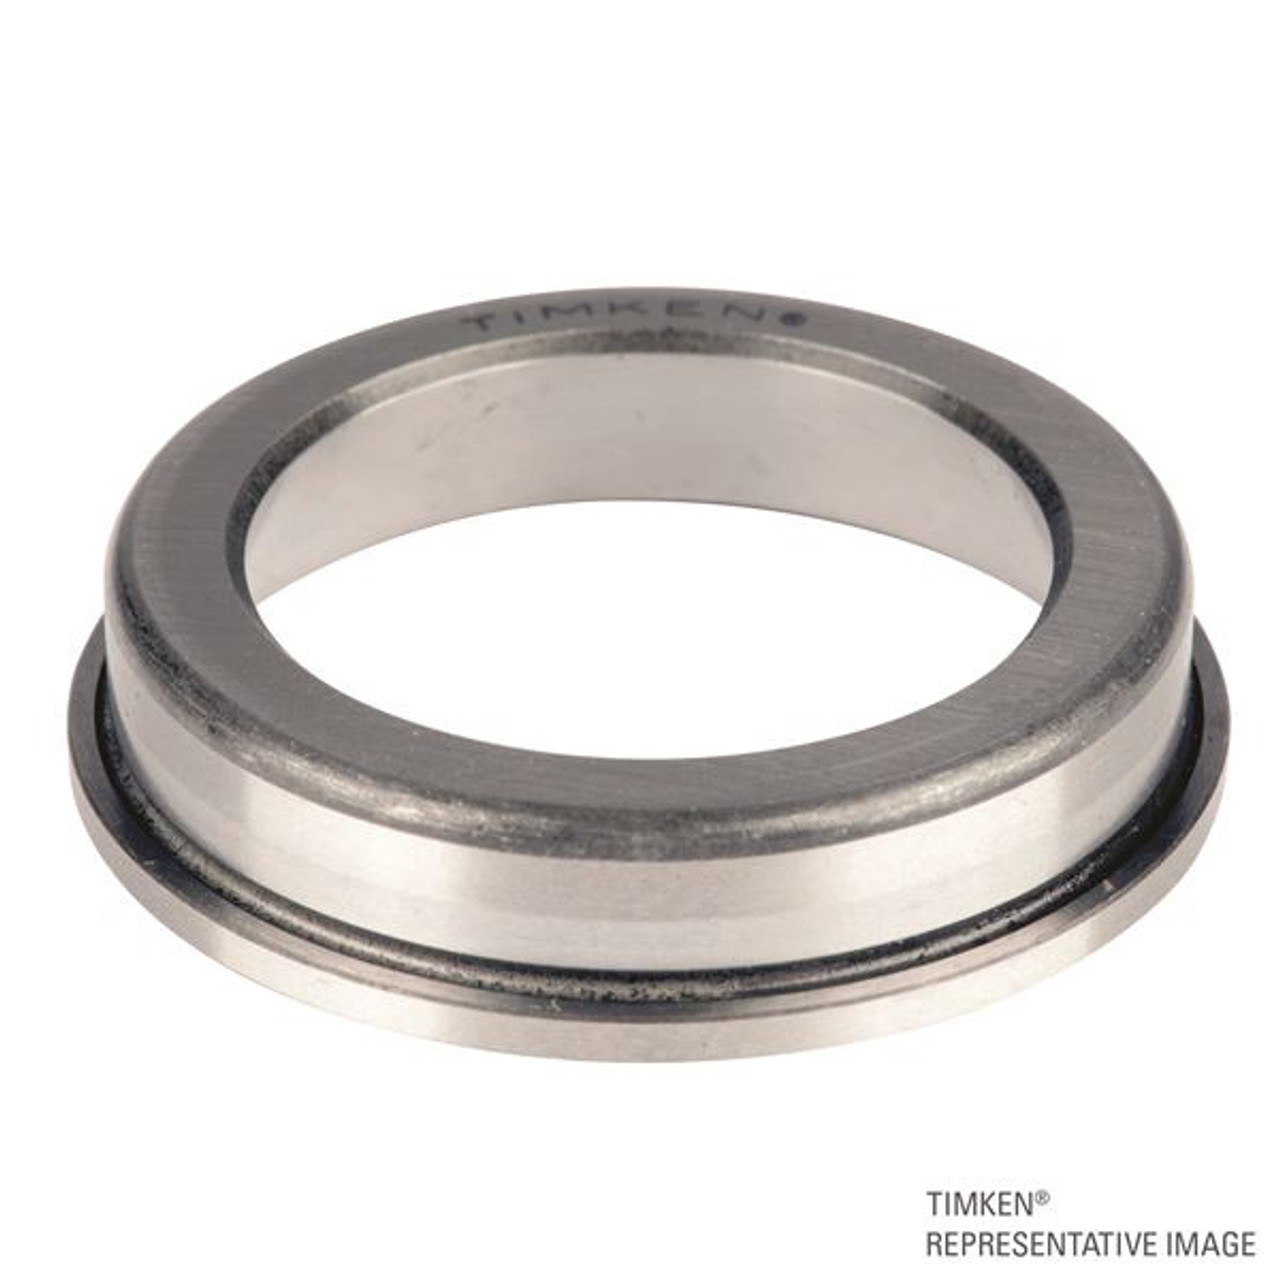 Timken® Single Row Flanged Cup - Precision Class  48220B-3